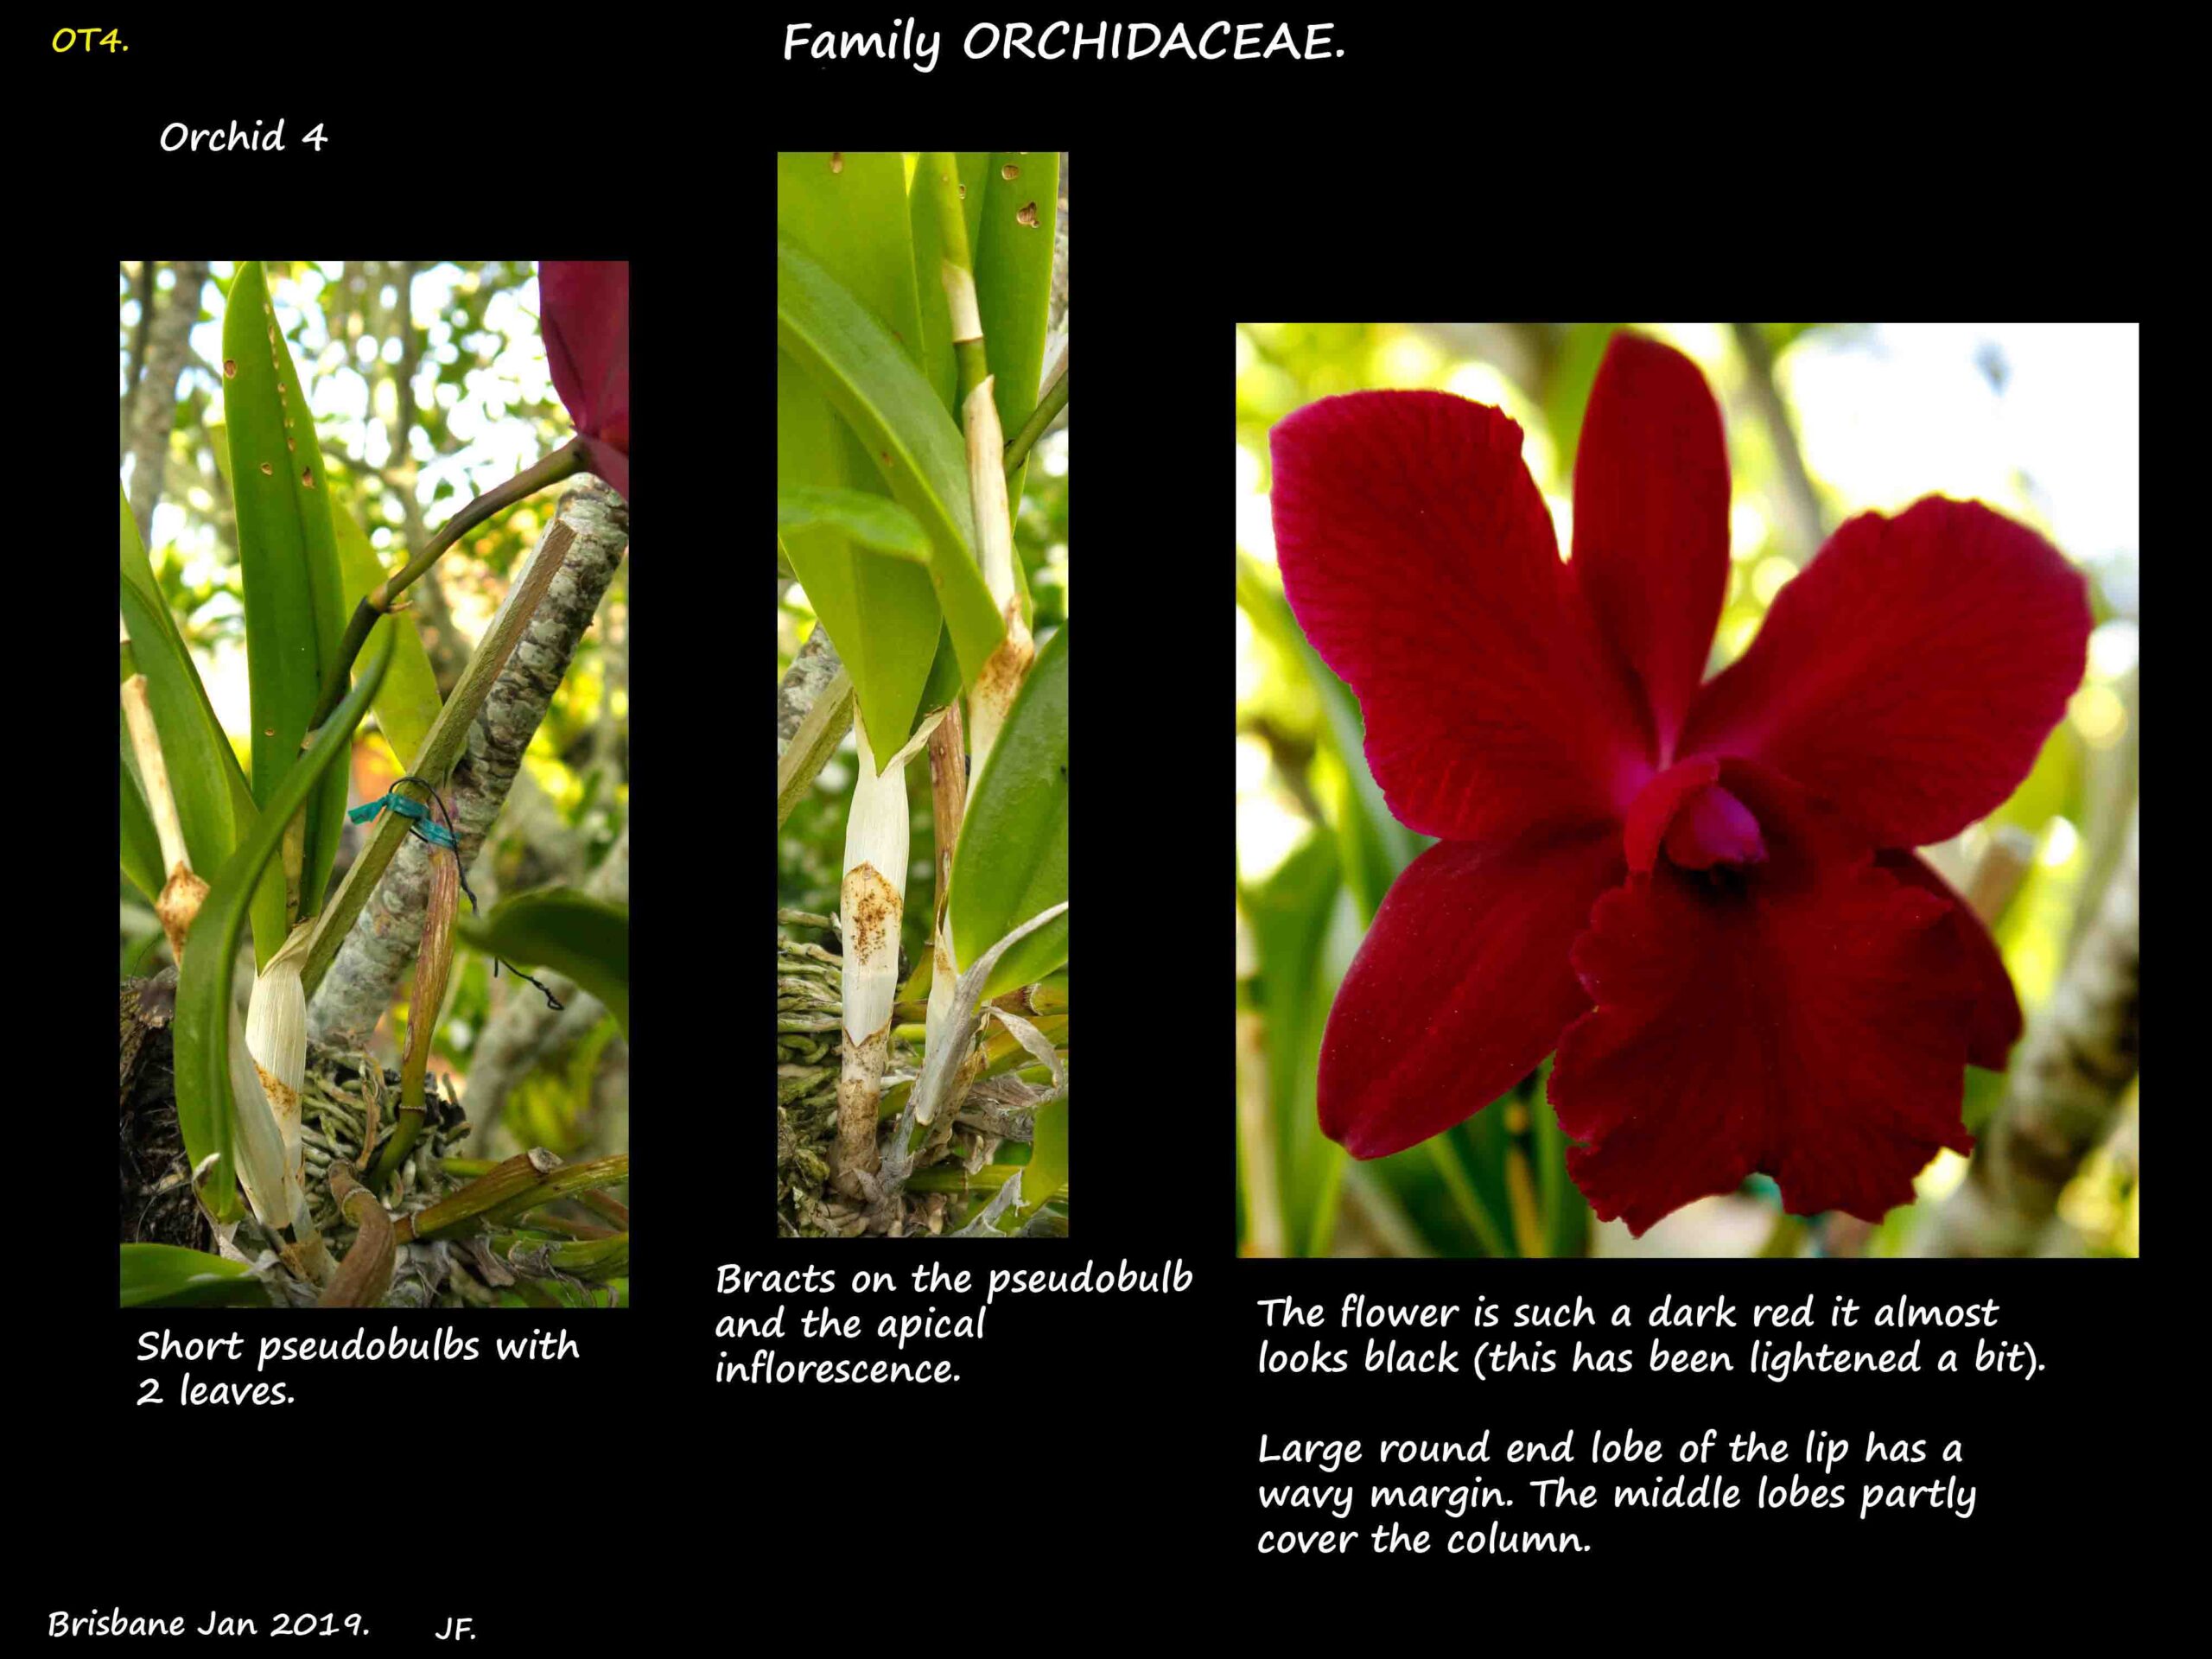 3 An orchid with blackish-red flowers